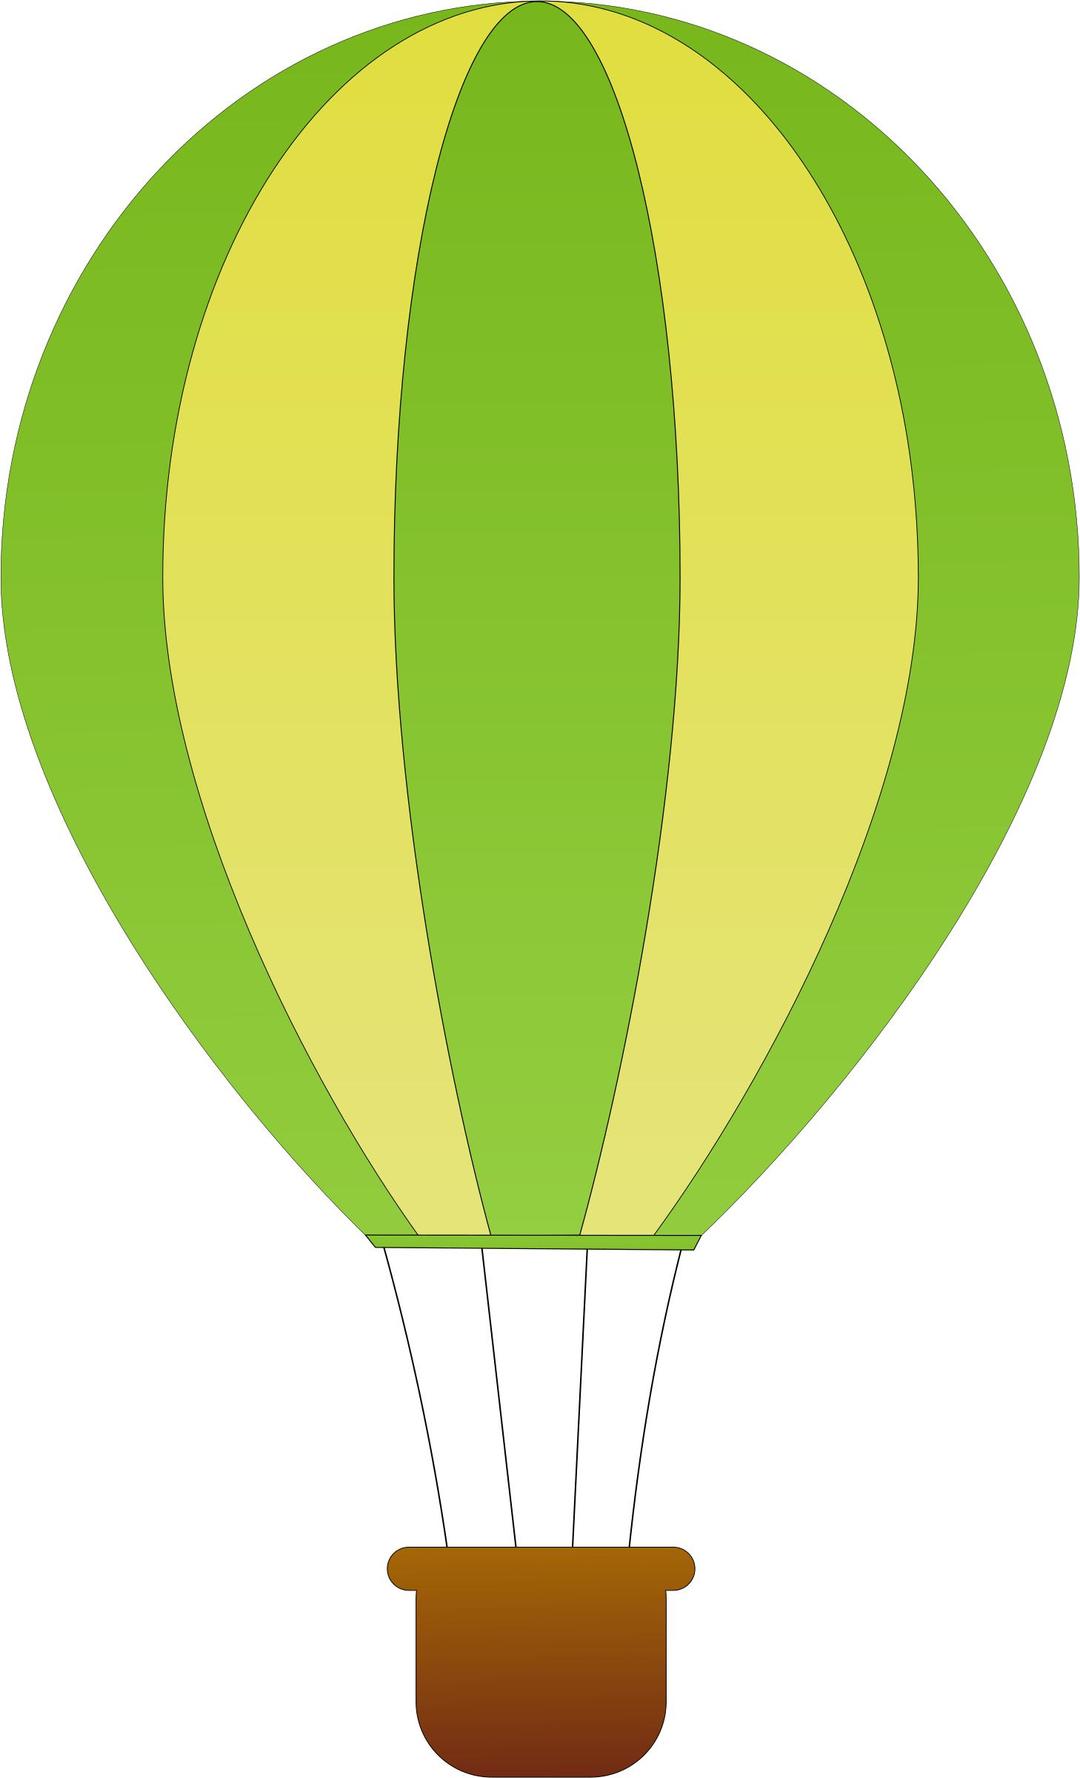 Vertical Striped Hot Air Balloons 1 png transparent